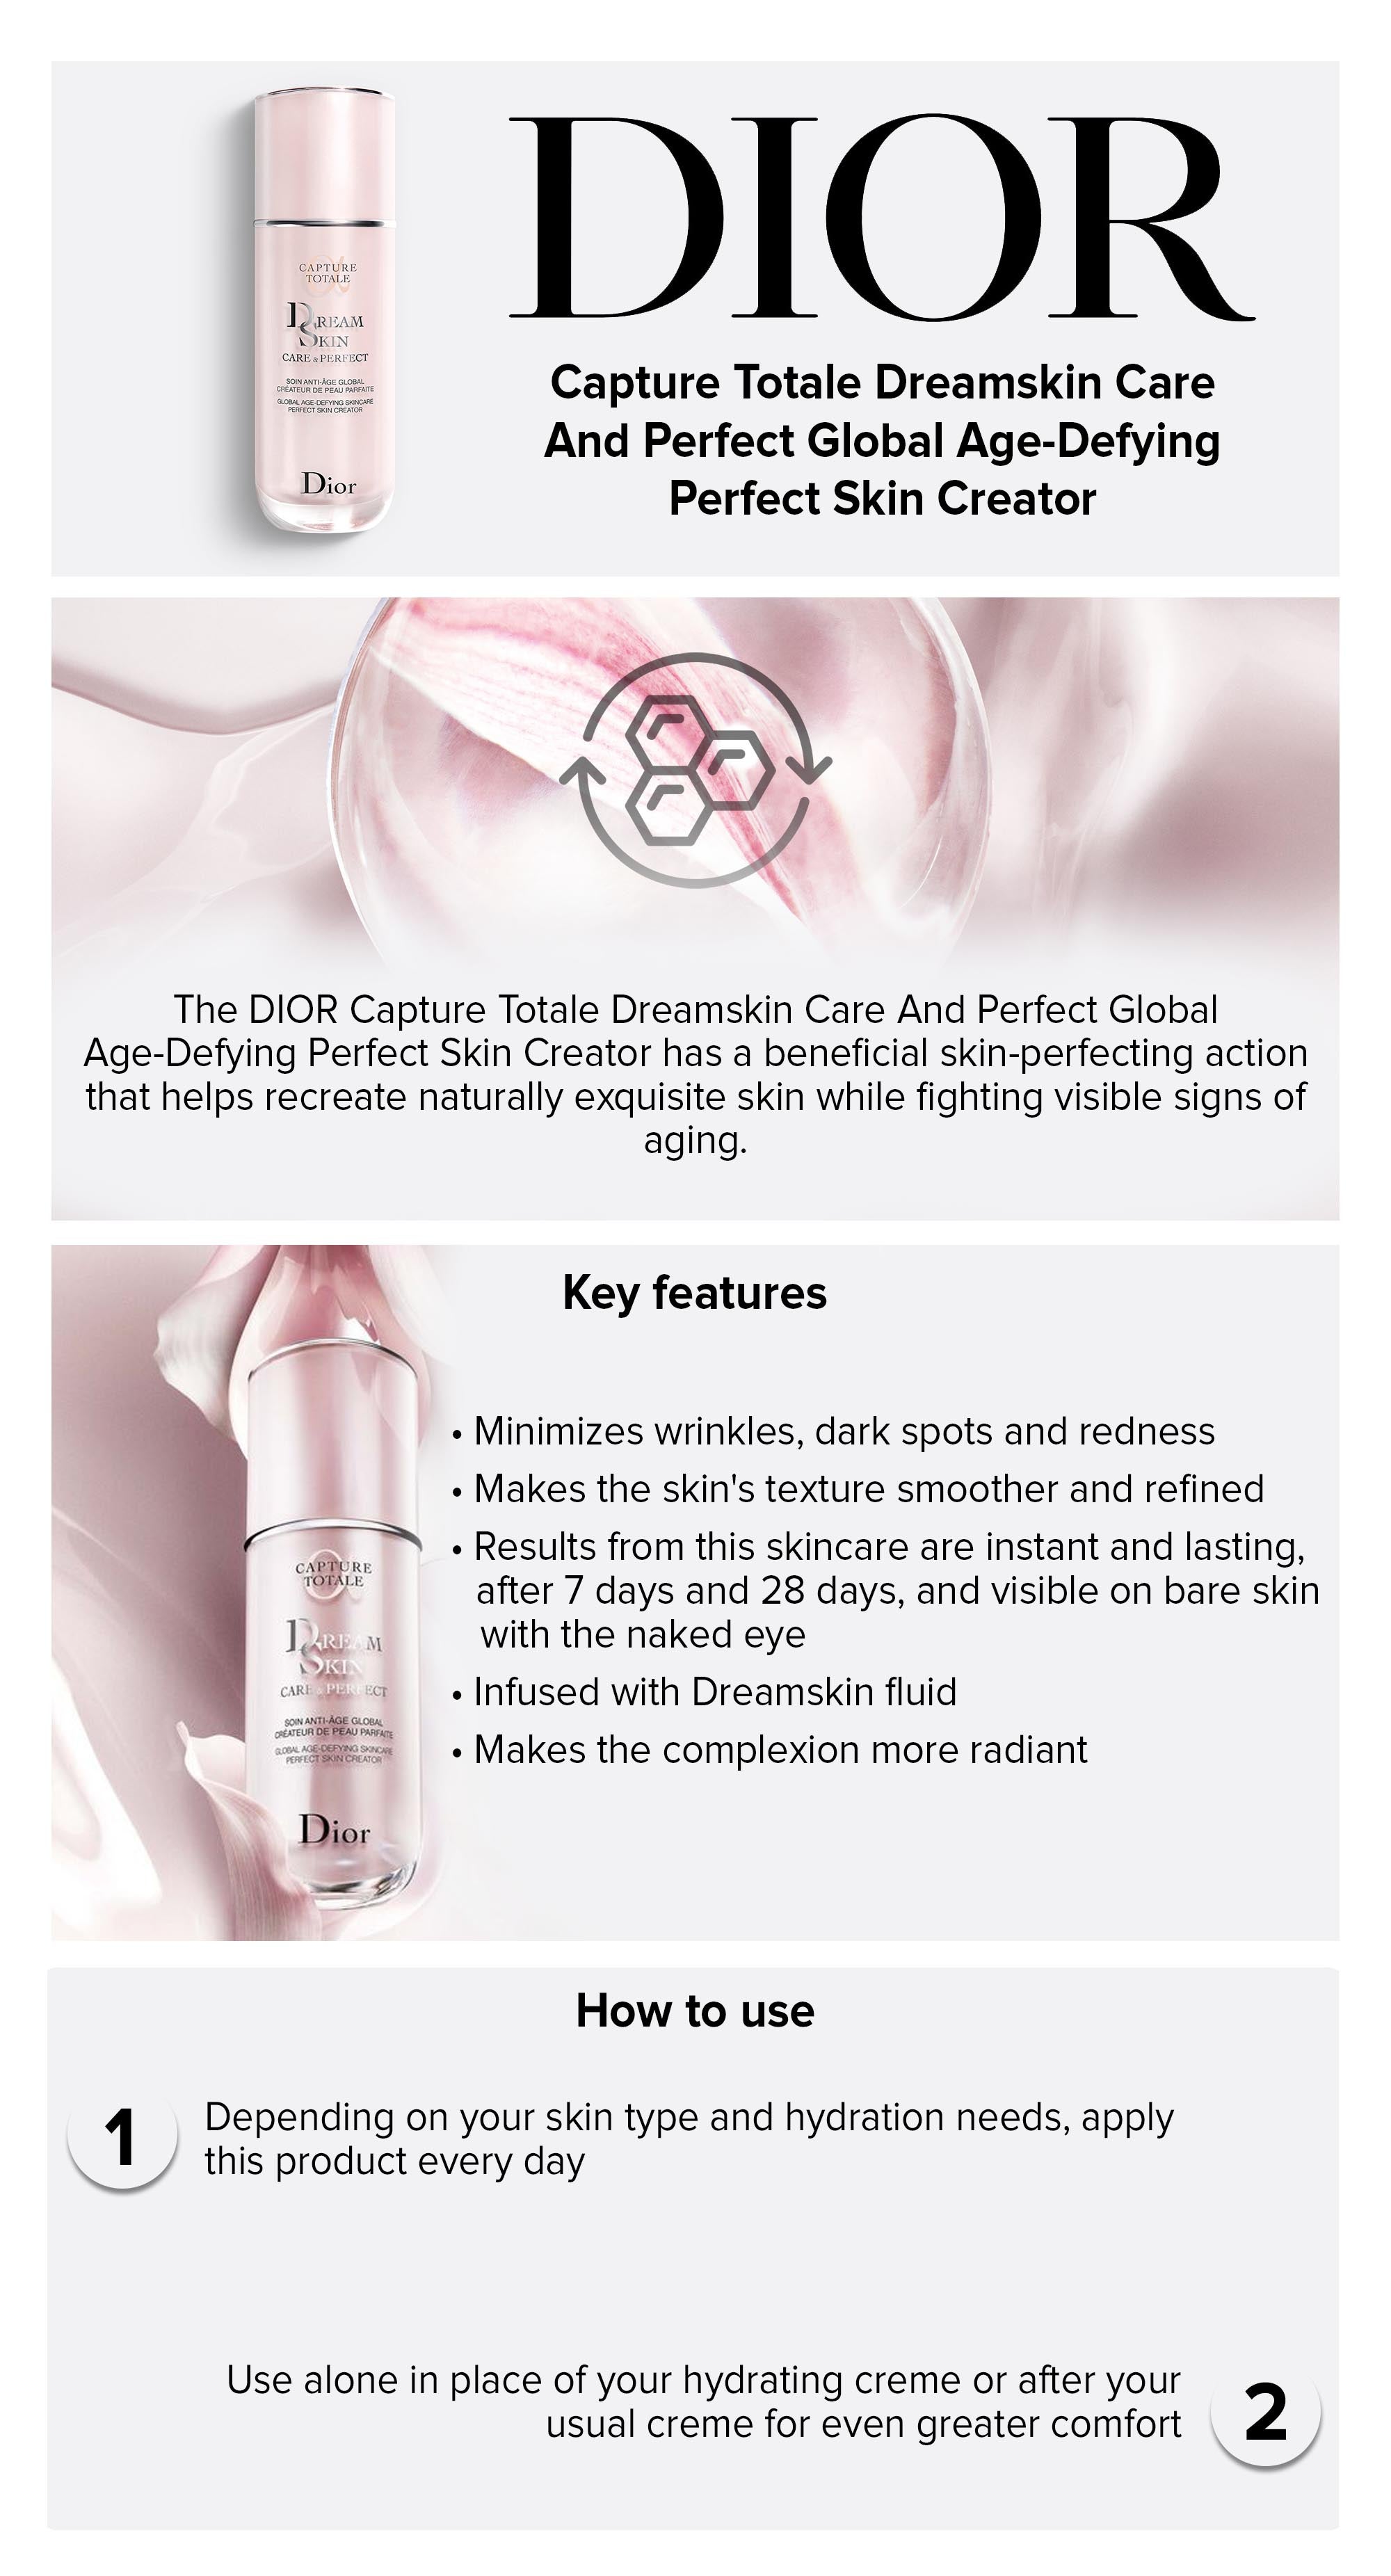 Capture Totale Dreamskin Care And Perfect Global Age-Defying Skin Creator 30ml